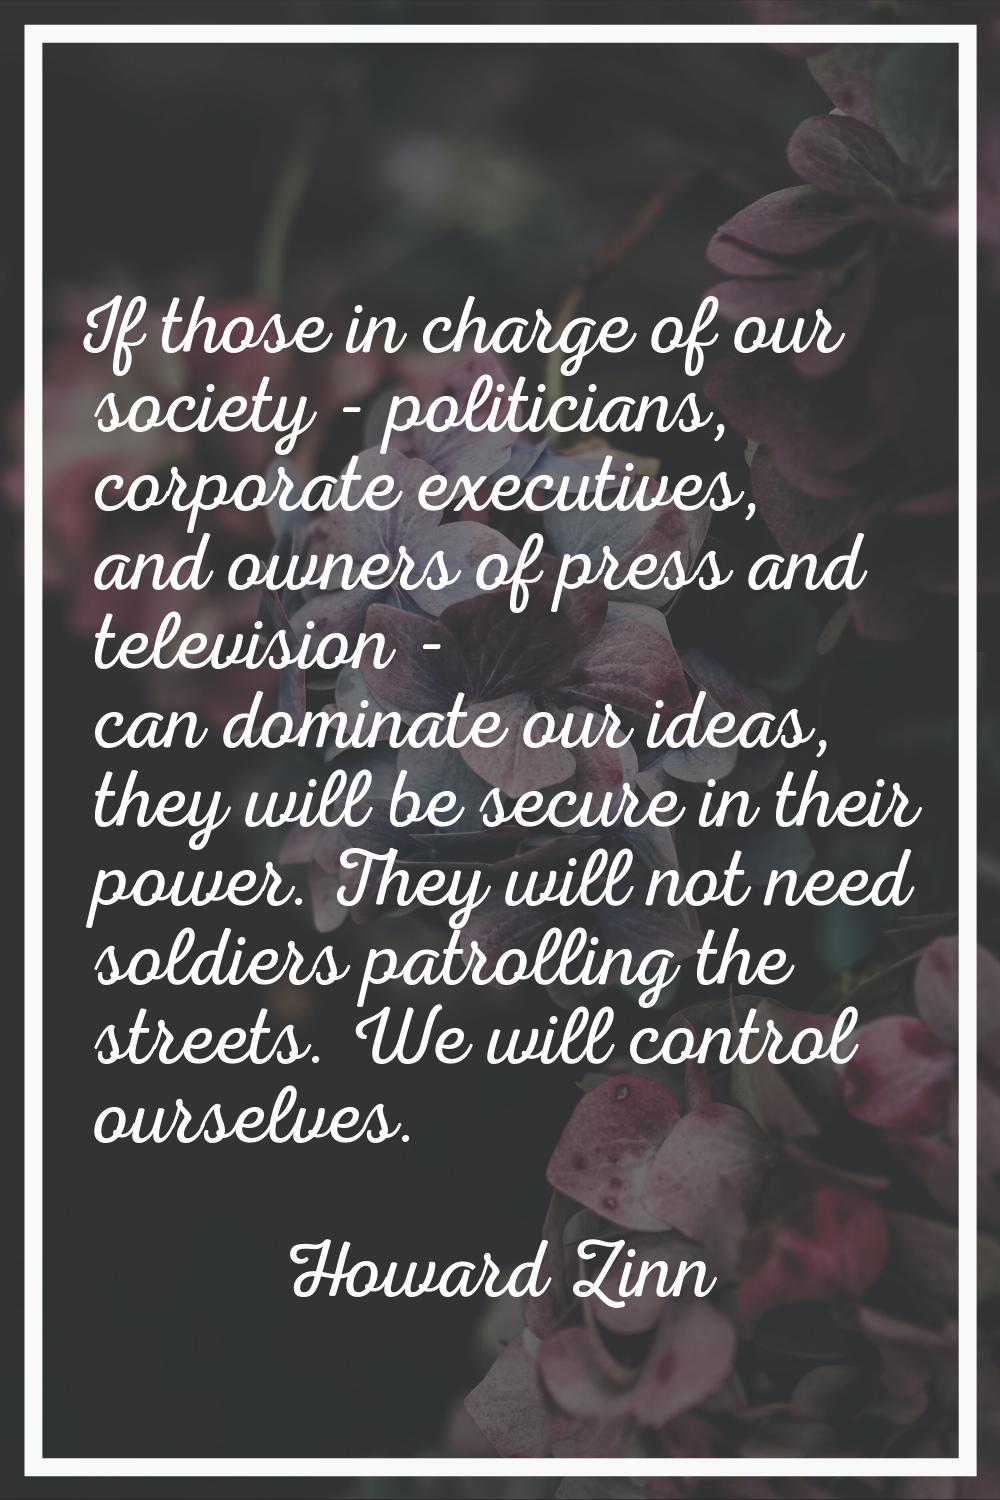 If those in charge of our society - politicians, corporate executives, and owners of press and tele